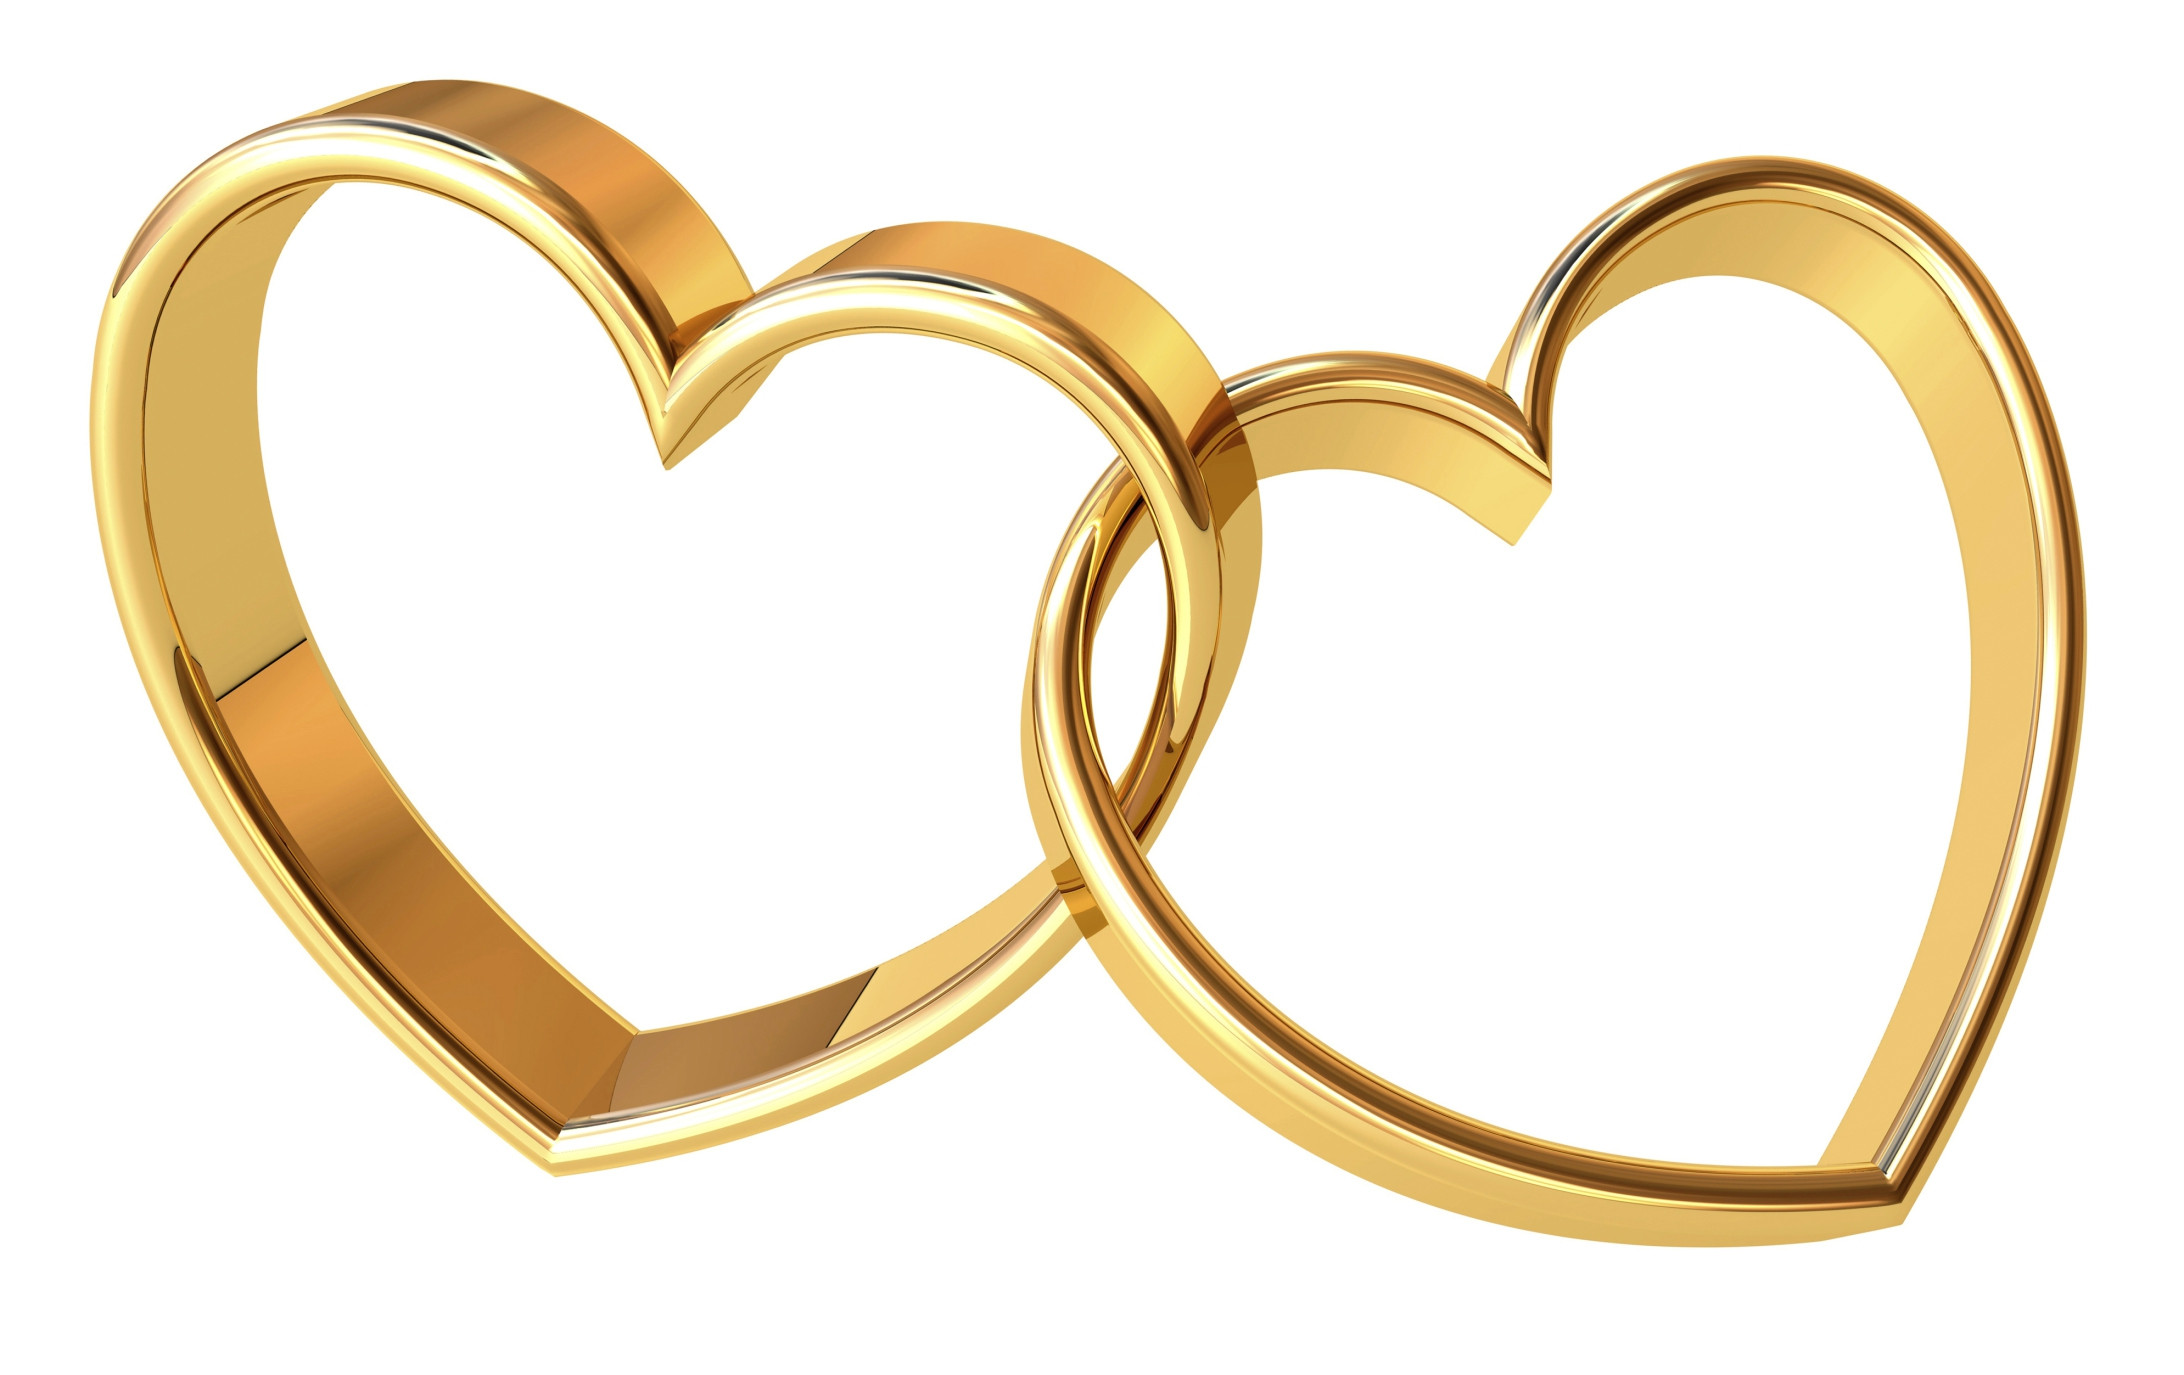 Wedding Rings Clip Art
 Wedding rings clip art free vector in open office drawing